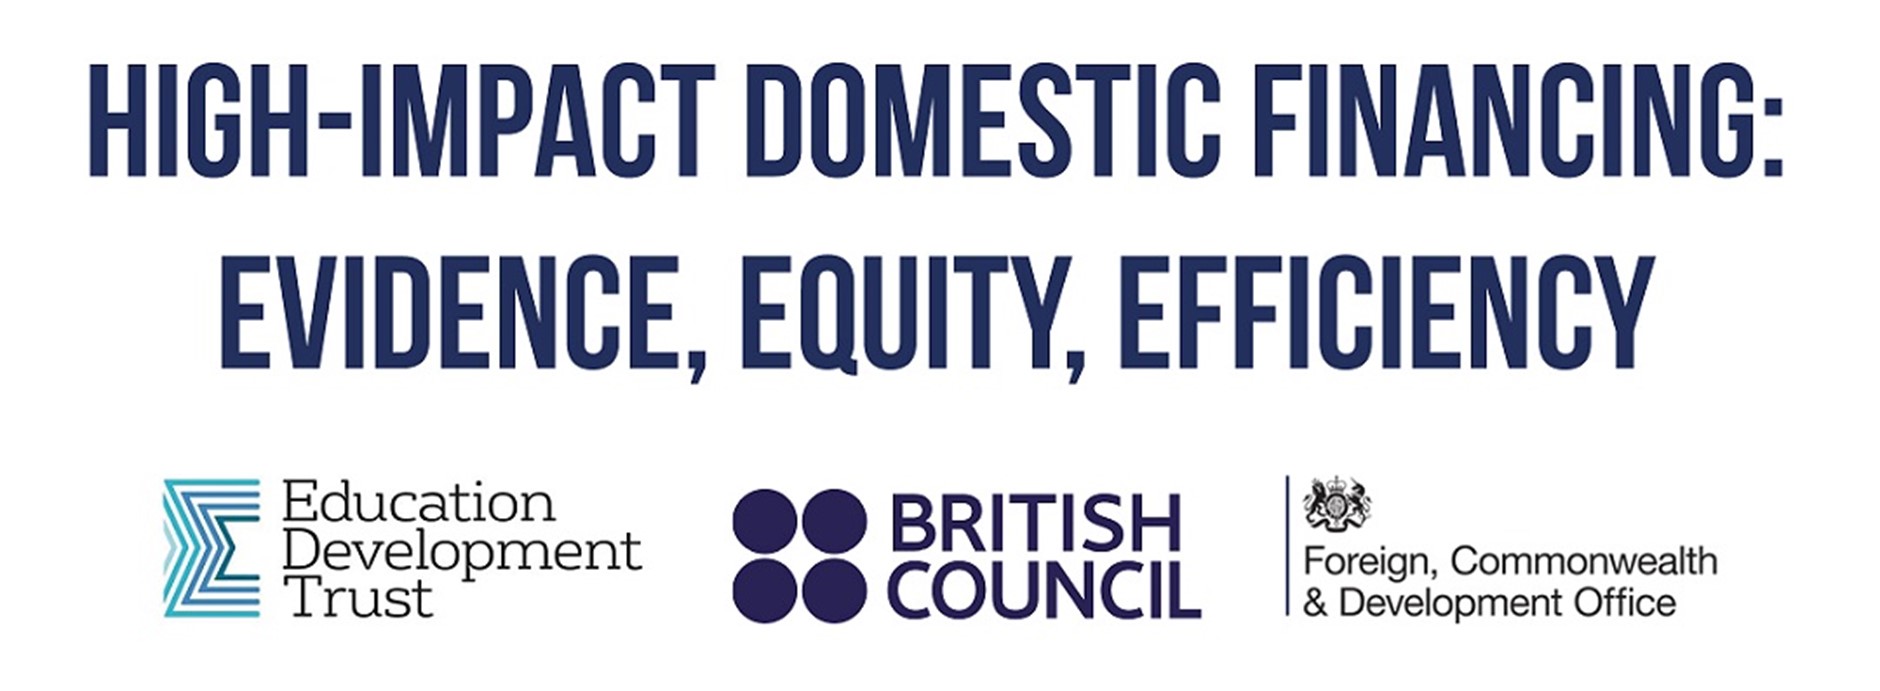 High-Impact Domestic Financing: Evidence, Equity, Efficiency